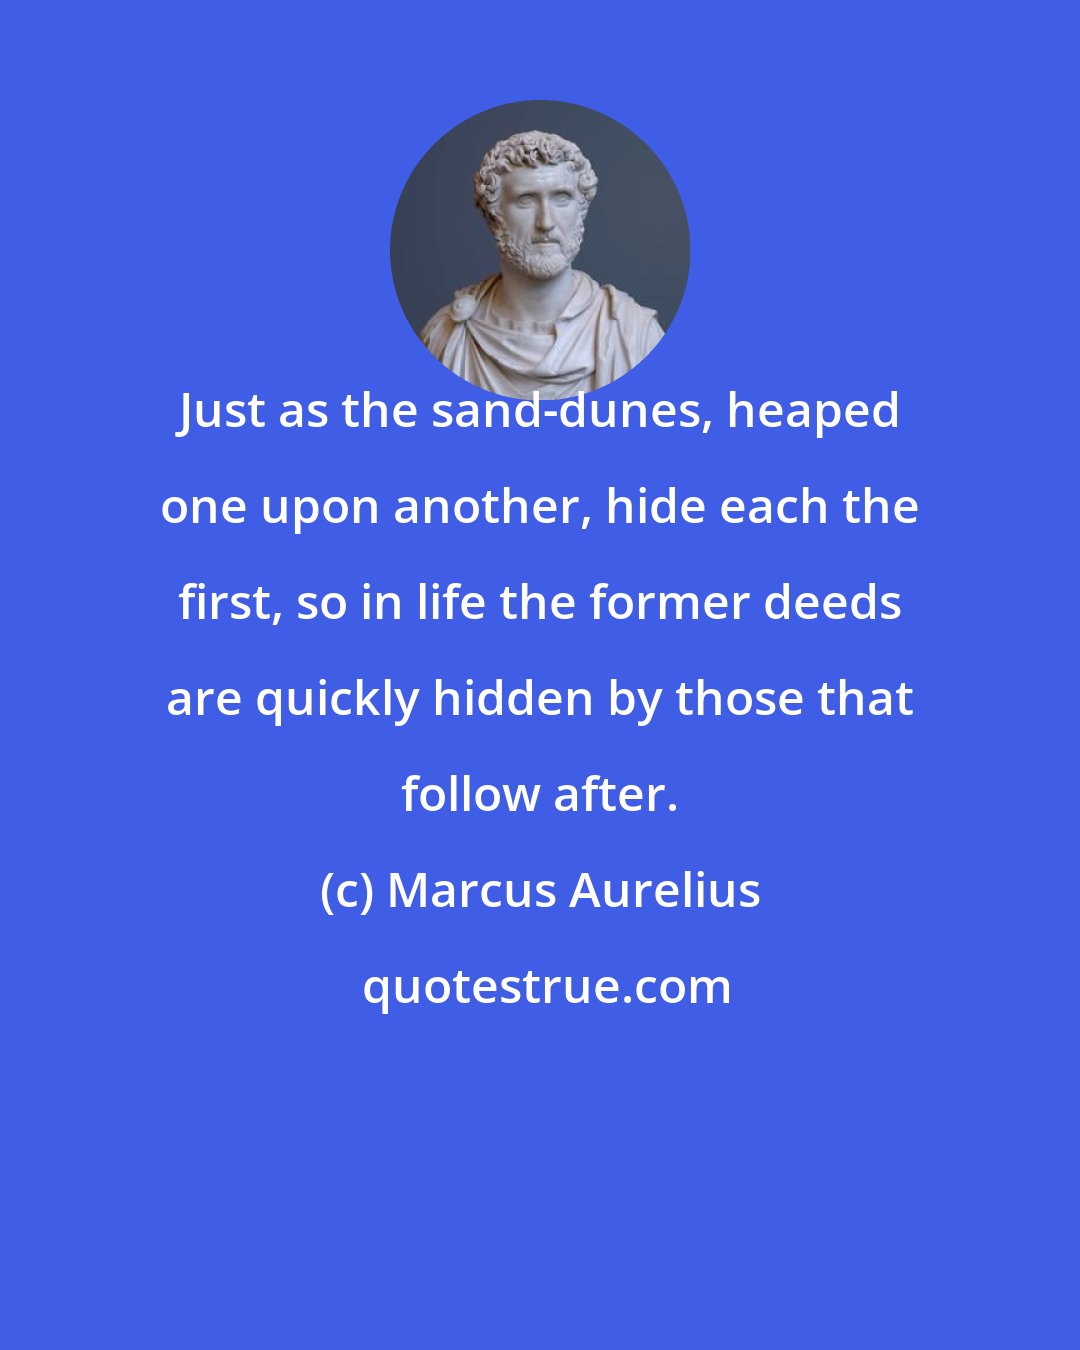 Marcus Aurelius: Just as the sand-dunes, heaped one upon another, hide each the first, so in life the former deeds are quickly hidden by those that follow after.